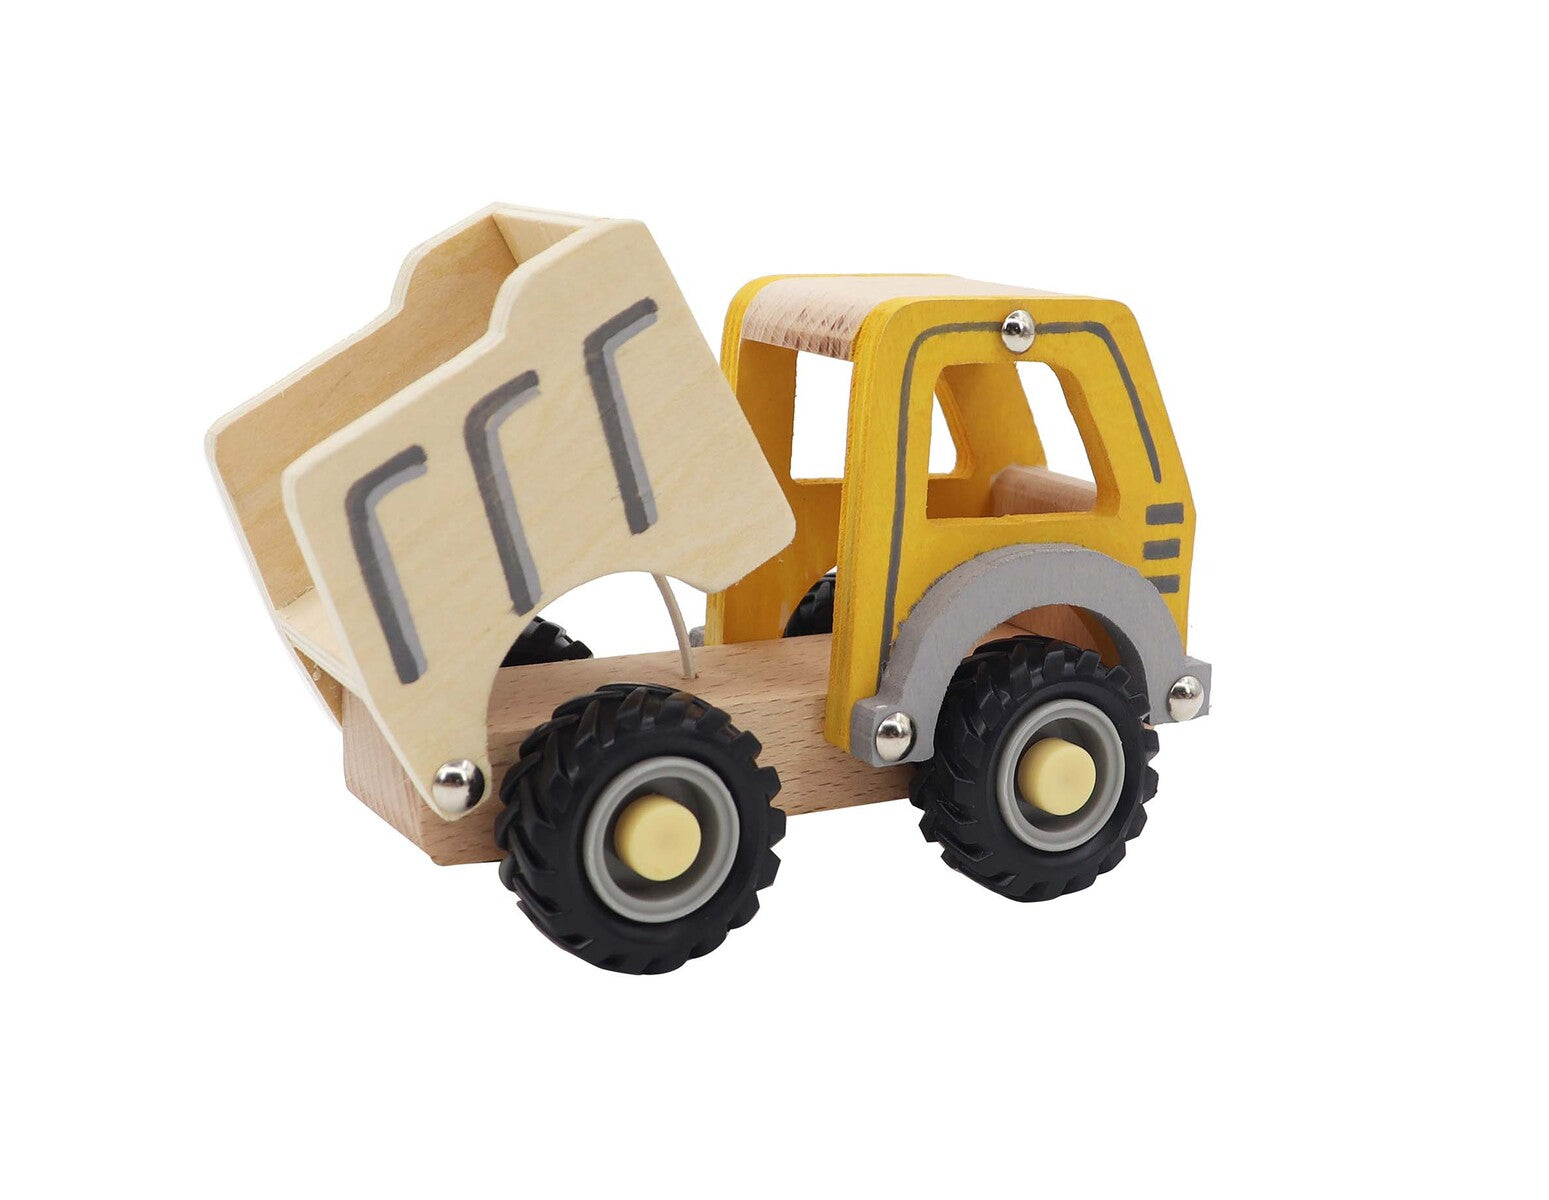 wooden toy dump truck - angus and dudley